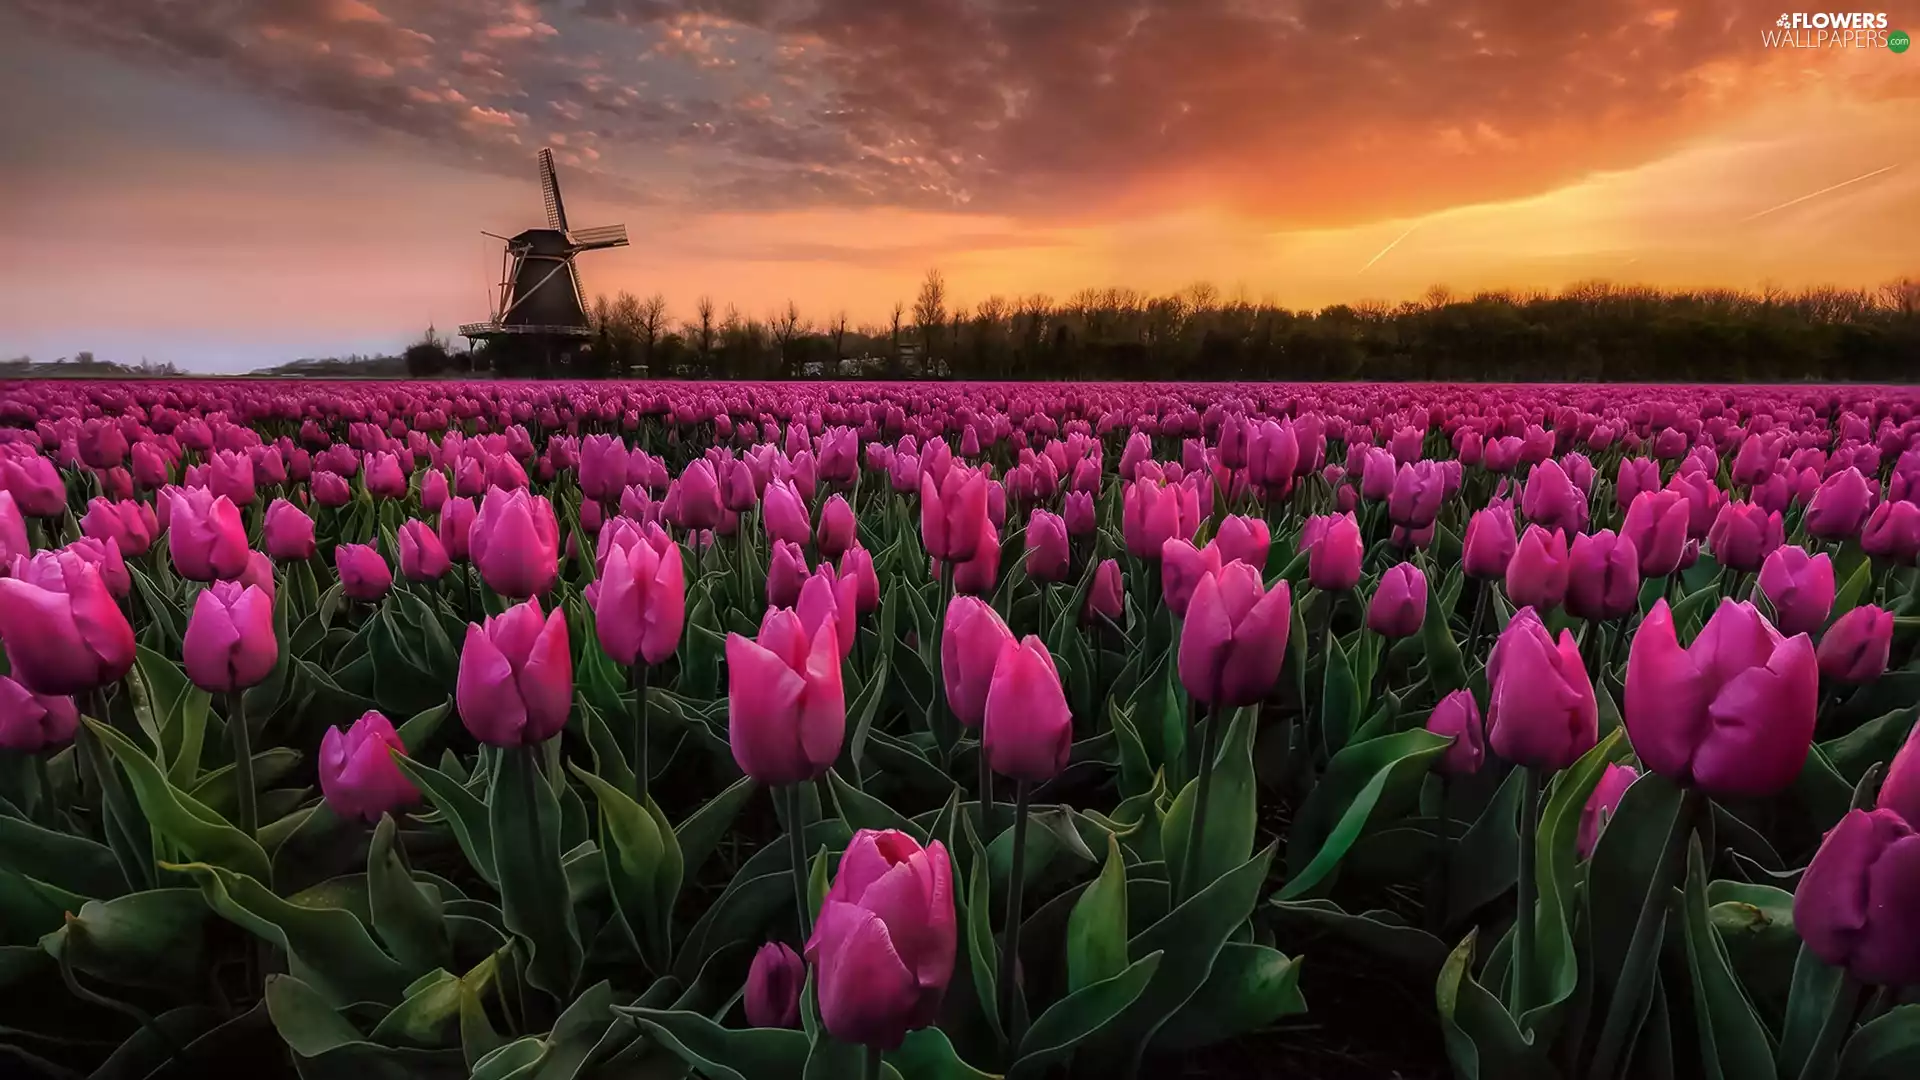 Windmill, Pink, viewes, Tulips, plantation, trees, Great Sunsets